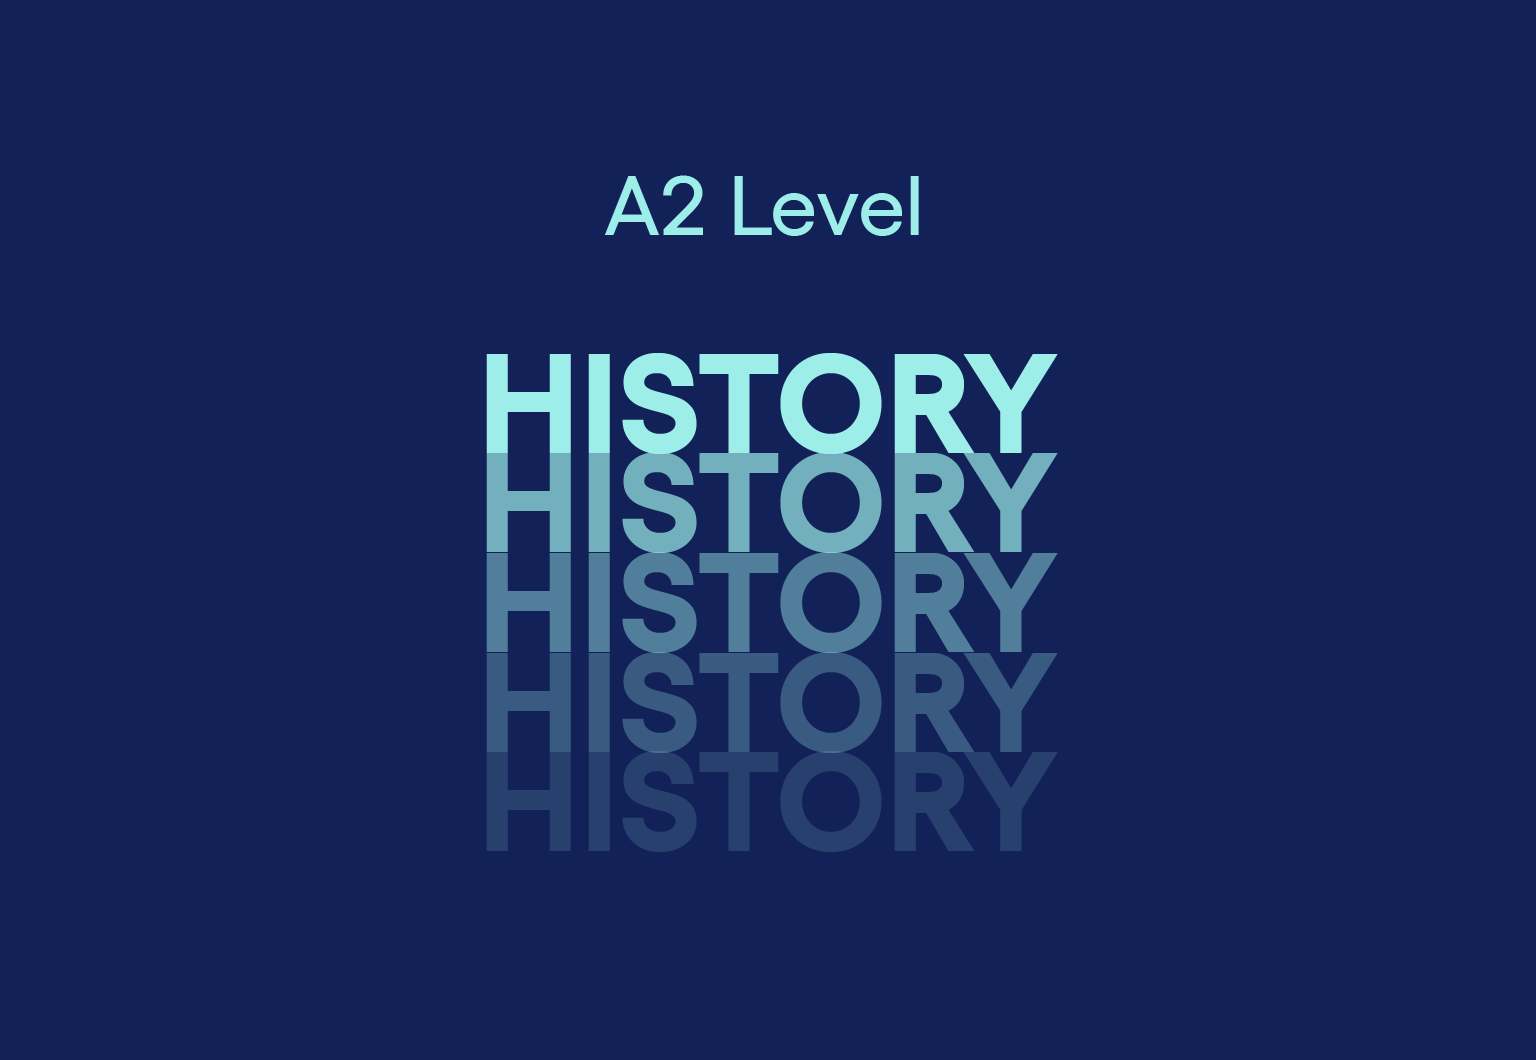 A2 Level History